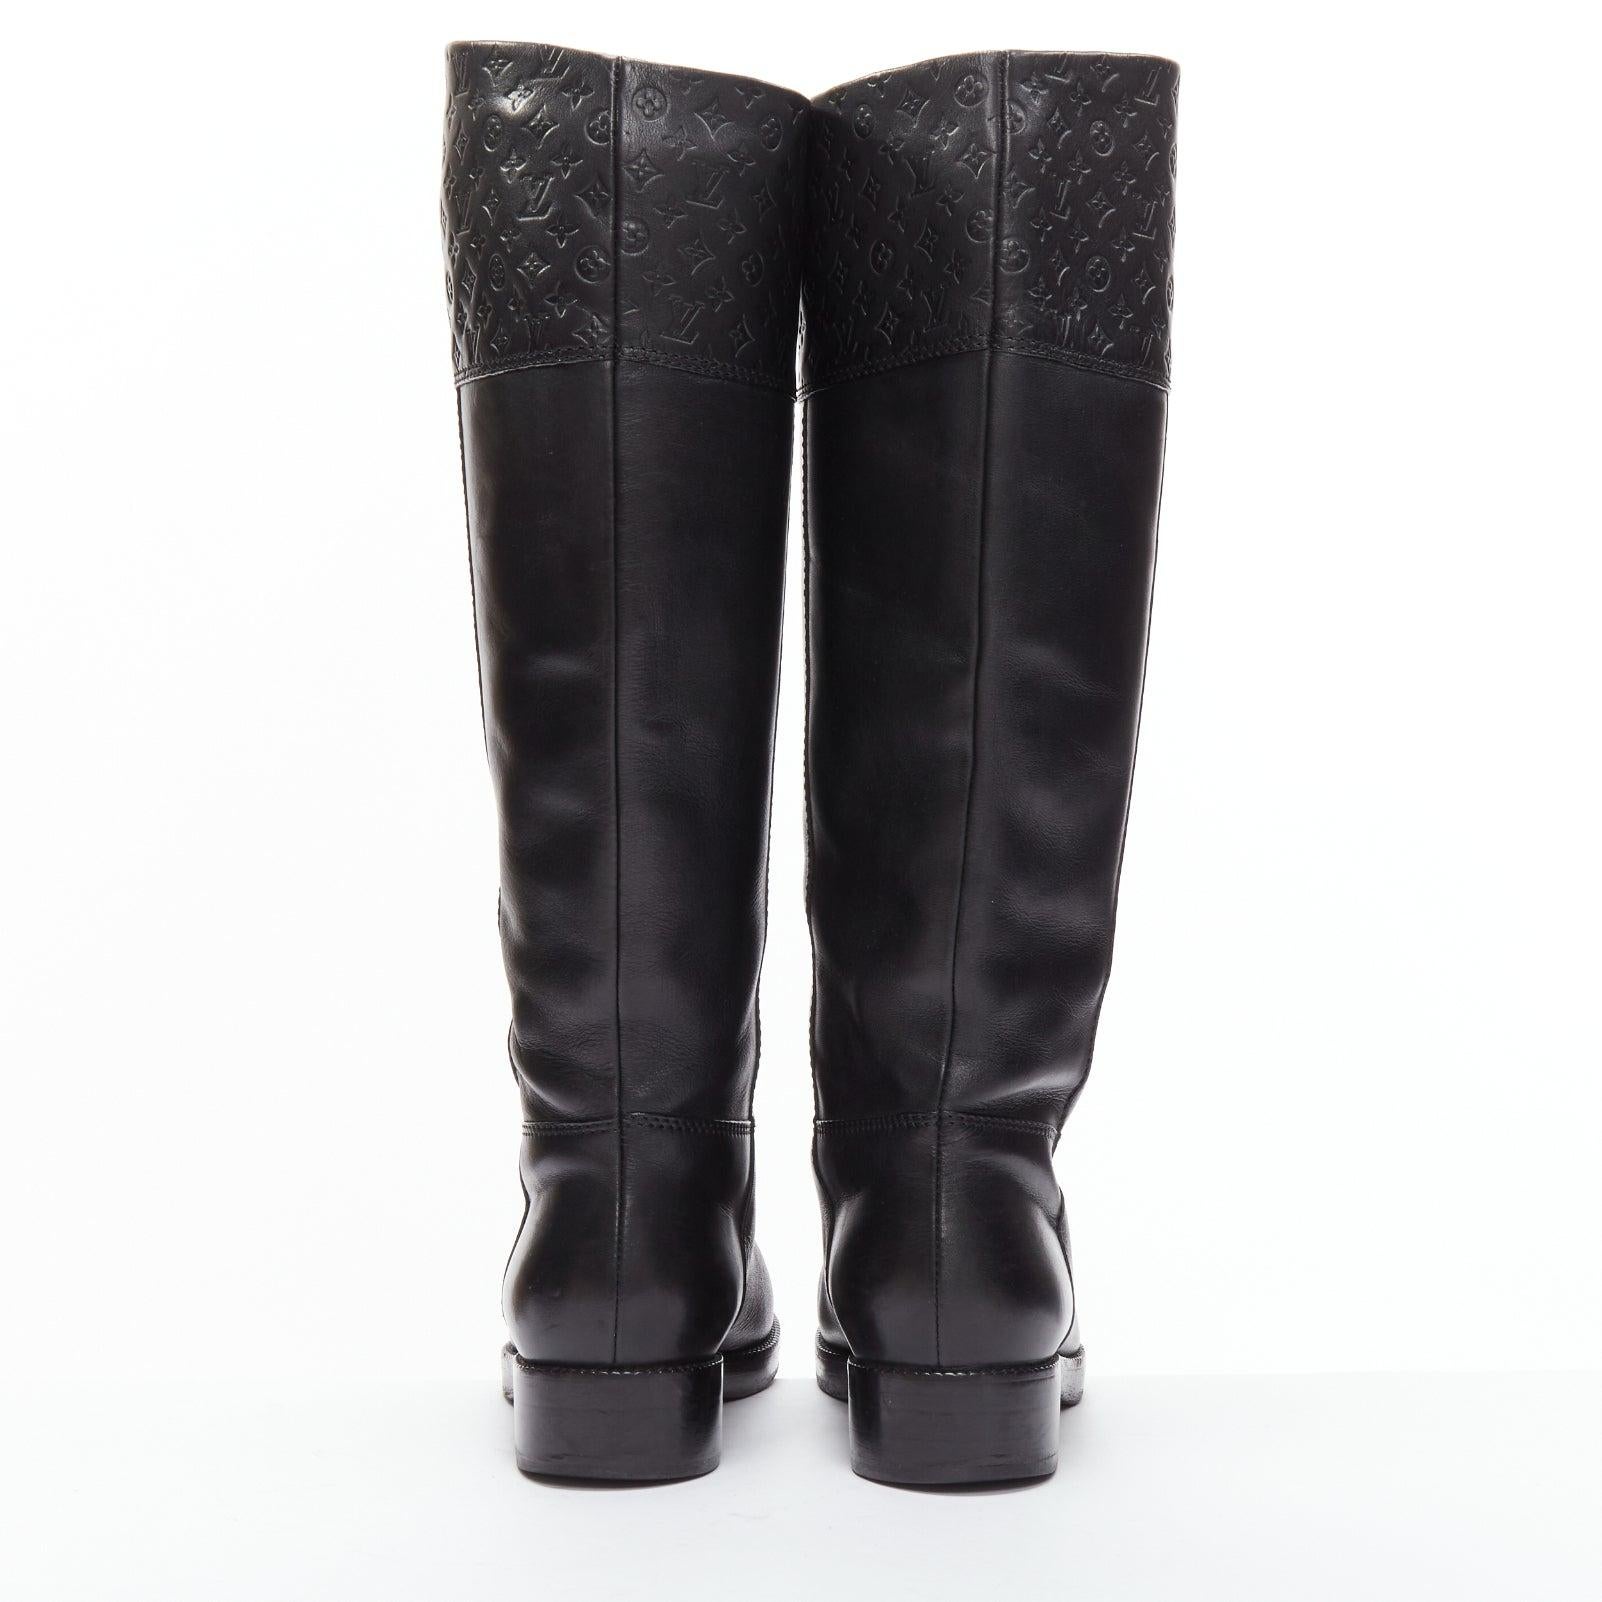 Women's LOUIS VUITTON black LV monogram embossed leather pull on riding boots EU37.5